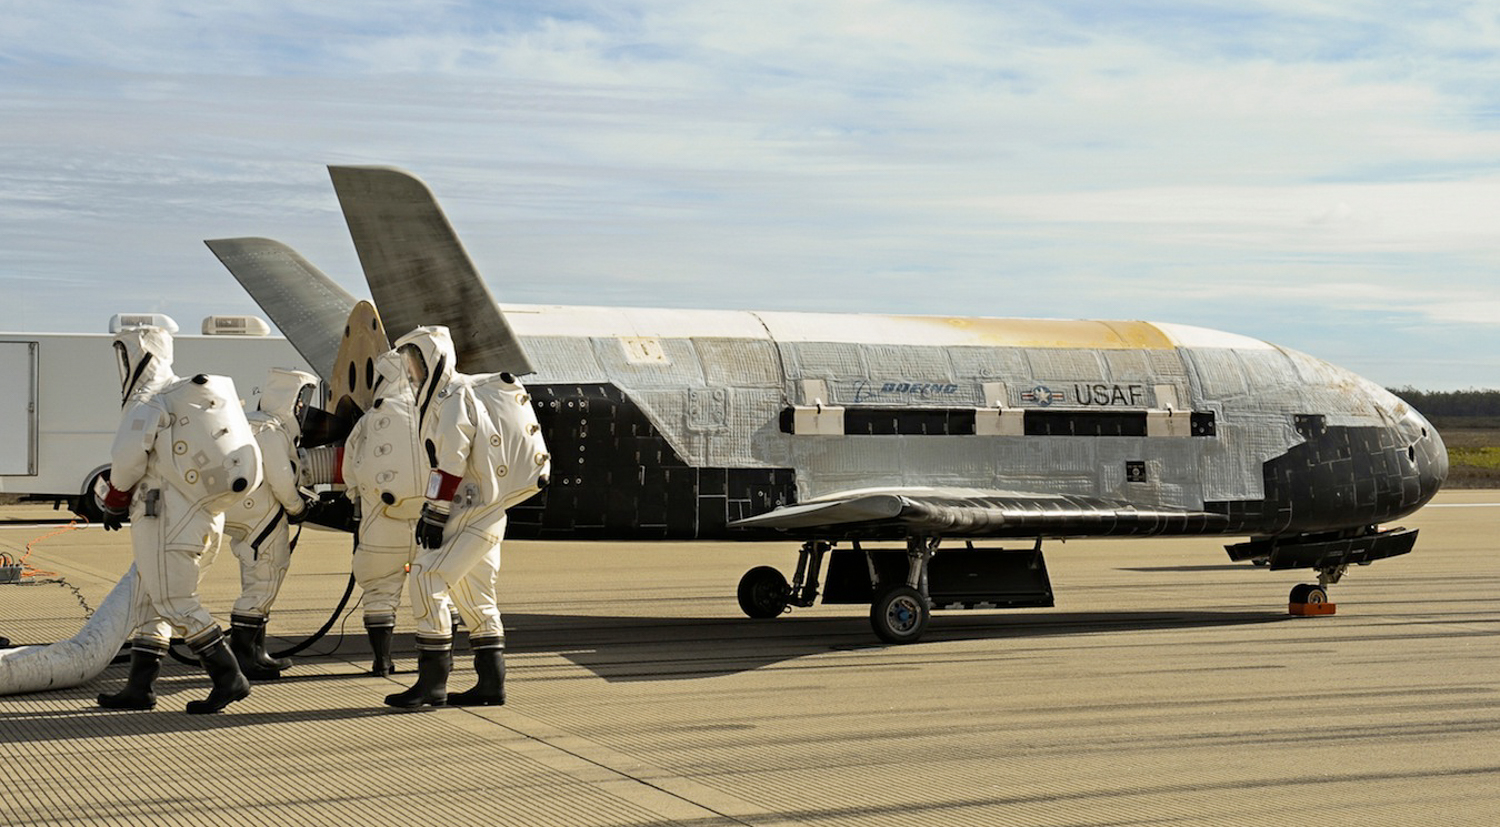 The X-37B Orbital Test Vehicle (OTV) at Vandenberg Air Force Base after completing 674 days in space. A total of three X-37B missions have been completed, totaling 1,367 days on orbit. OTV-4, launching on the AFSPC-5 mission May 20, is more focused on military spaceplane payload development instead of X-37B flight testing of its own systems, carrying a wide variety of military technology payloads for the Air Force, NAVY, and NRO, as well as an advanced NASA materials science experiment. Photo Credit: Boeing